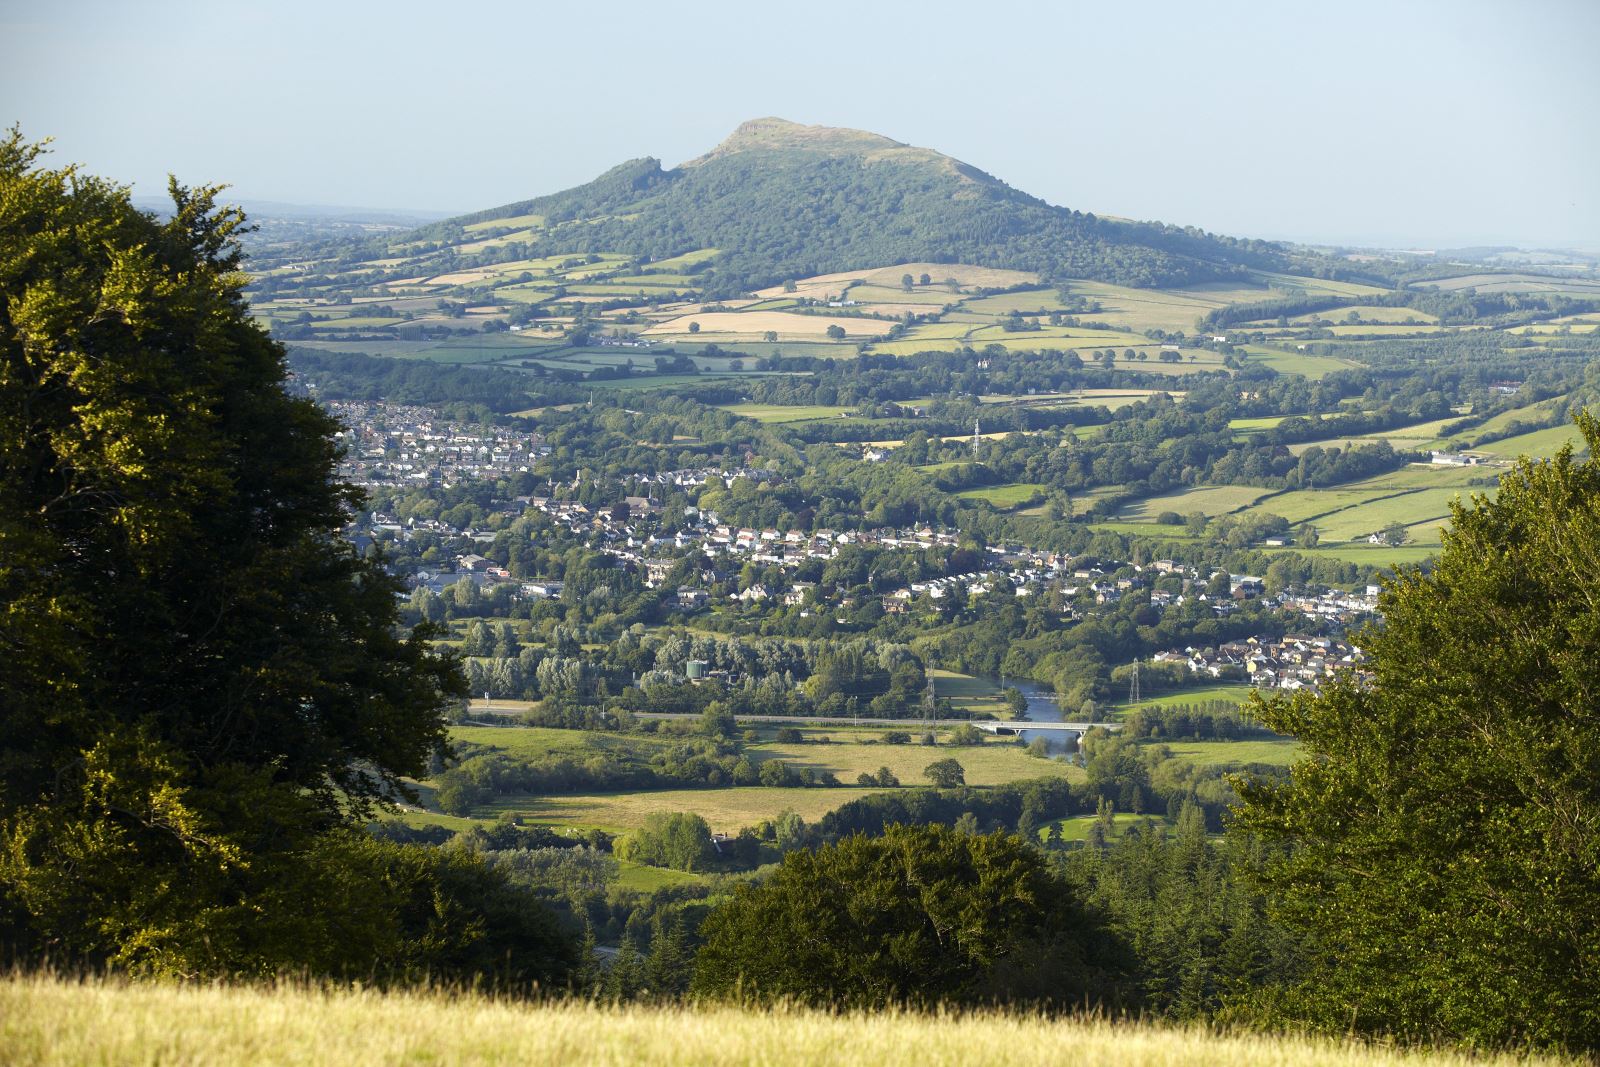 View of the Skirrid from the Blorenge